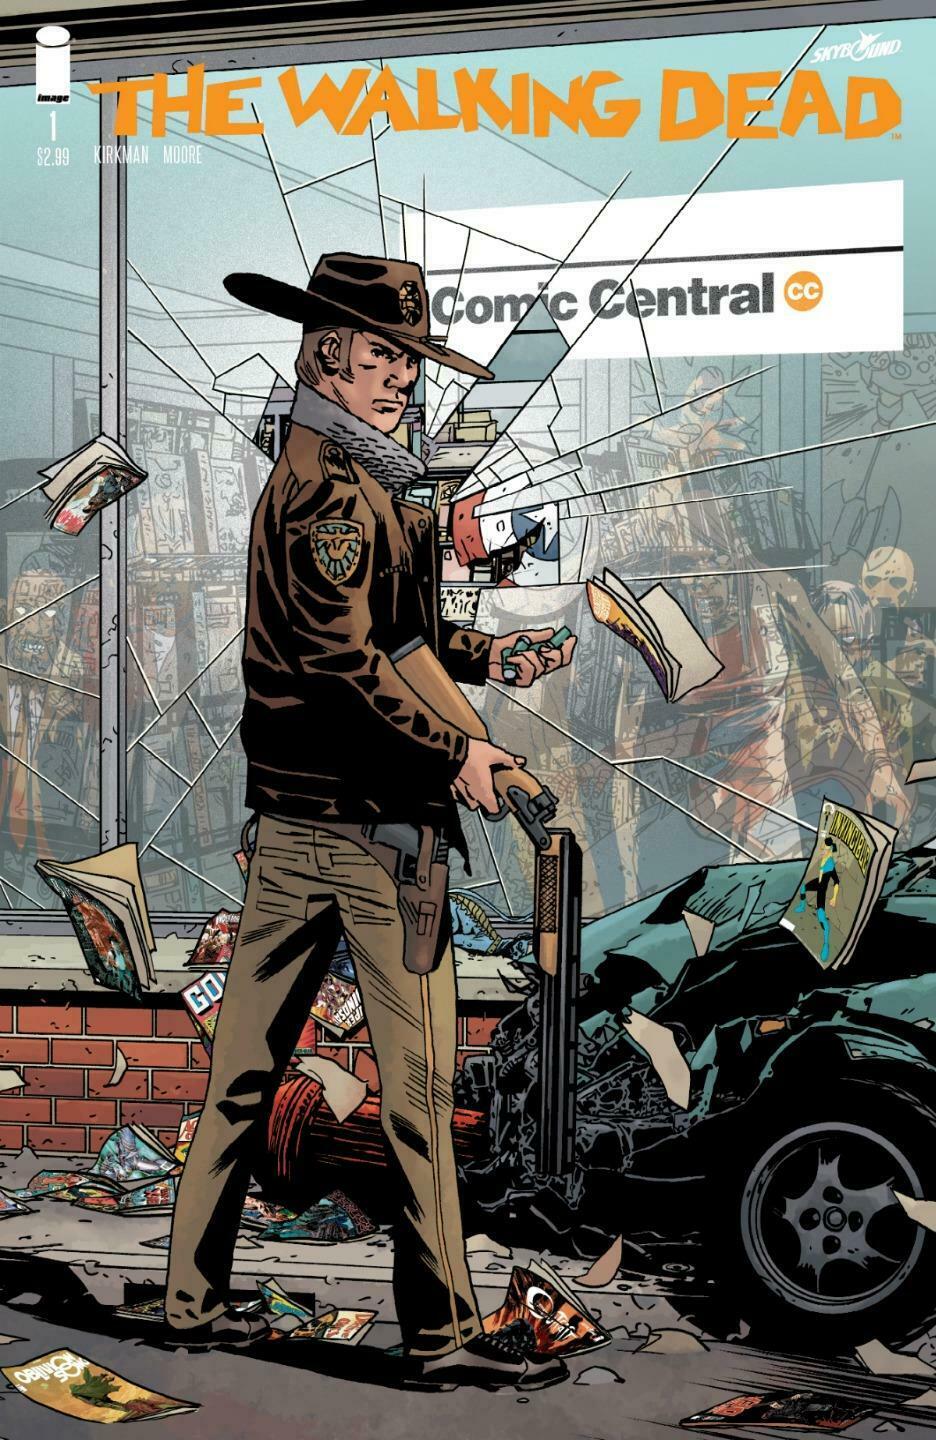 WALKING DEAD 15th ANNIVERSARY #1 COMIC CENTRAL EXCLUSIVE VARIANT